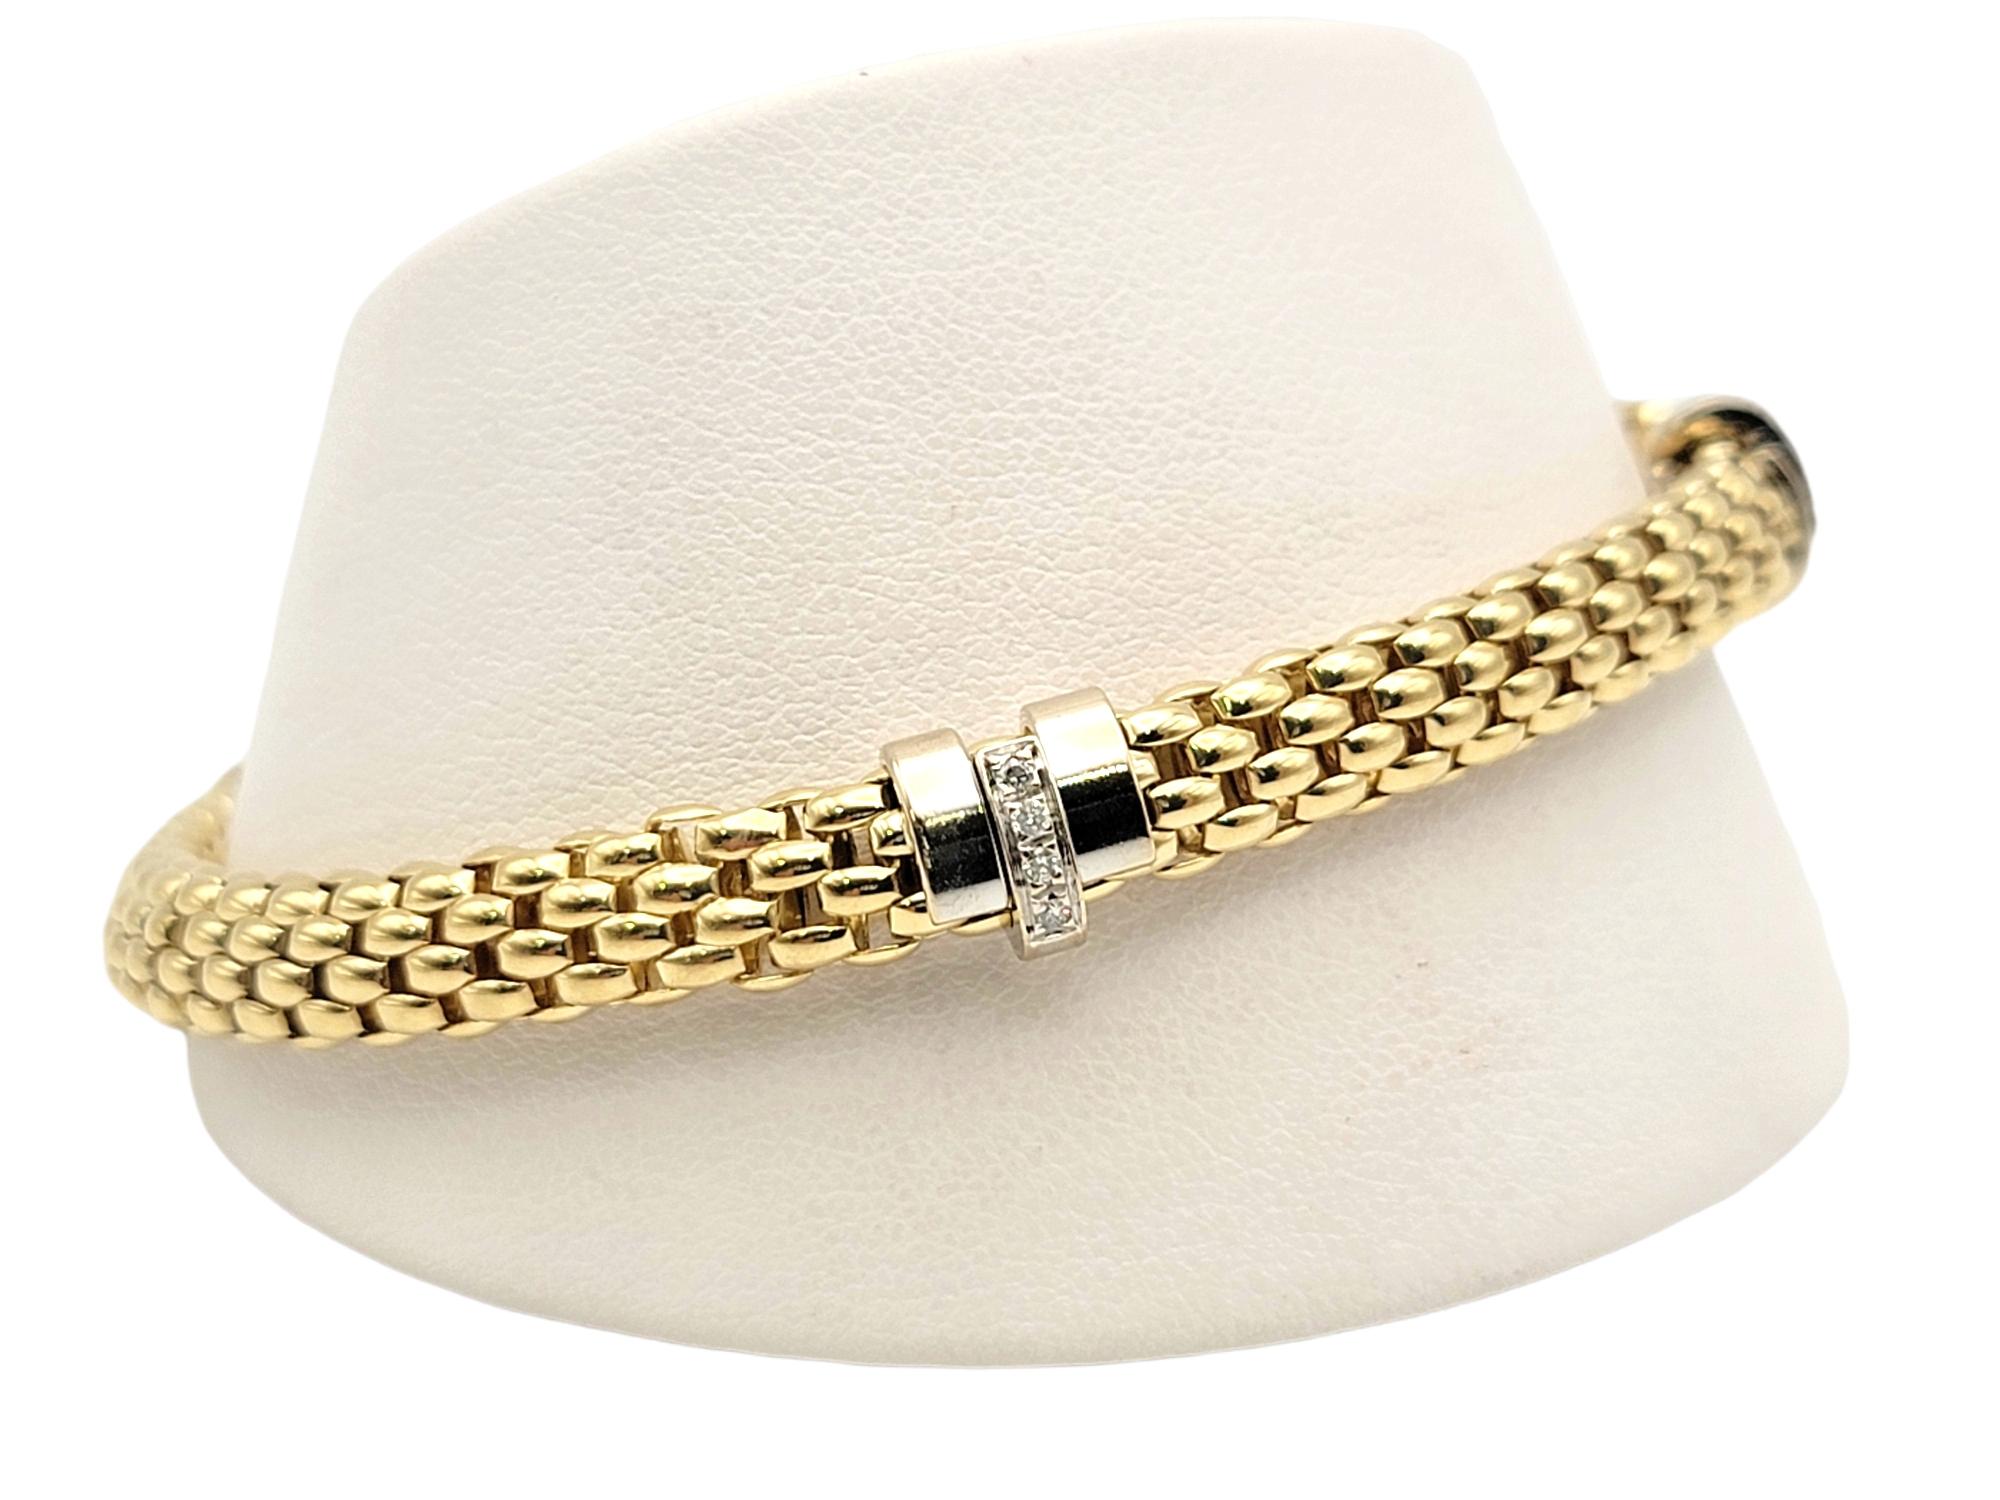 FOPE Two Tone 18 Karat Gold Mesh Link Bracelet with Pave Diamond Accents 6